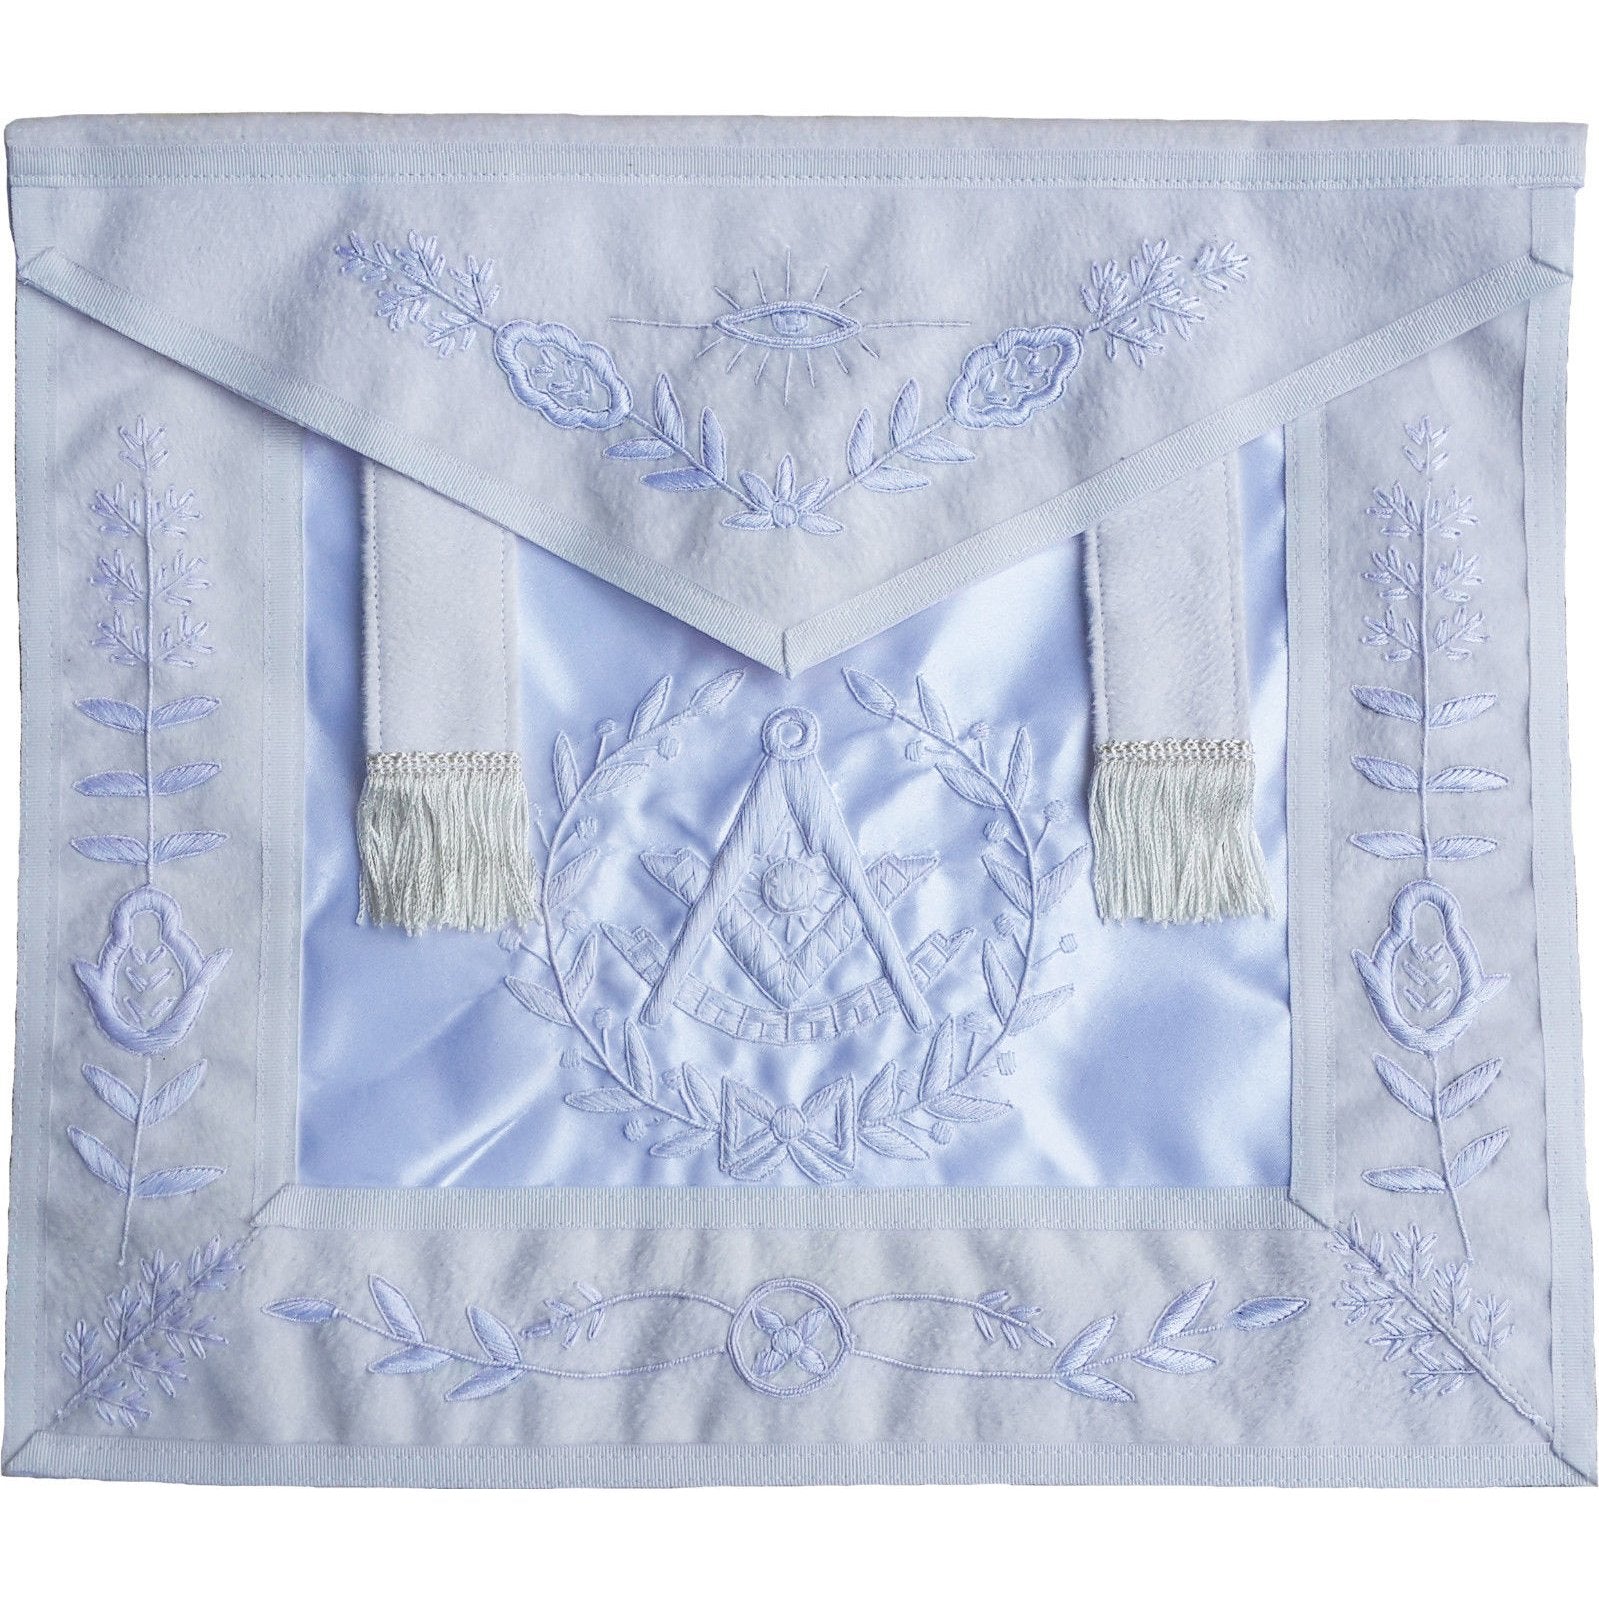 Past Master Blue Lodge Apron - All White with Side Tabs & Wreath - Bricks Masons